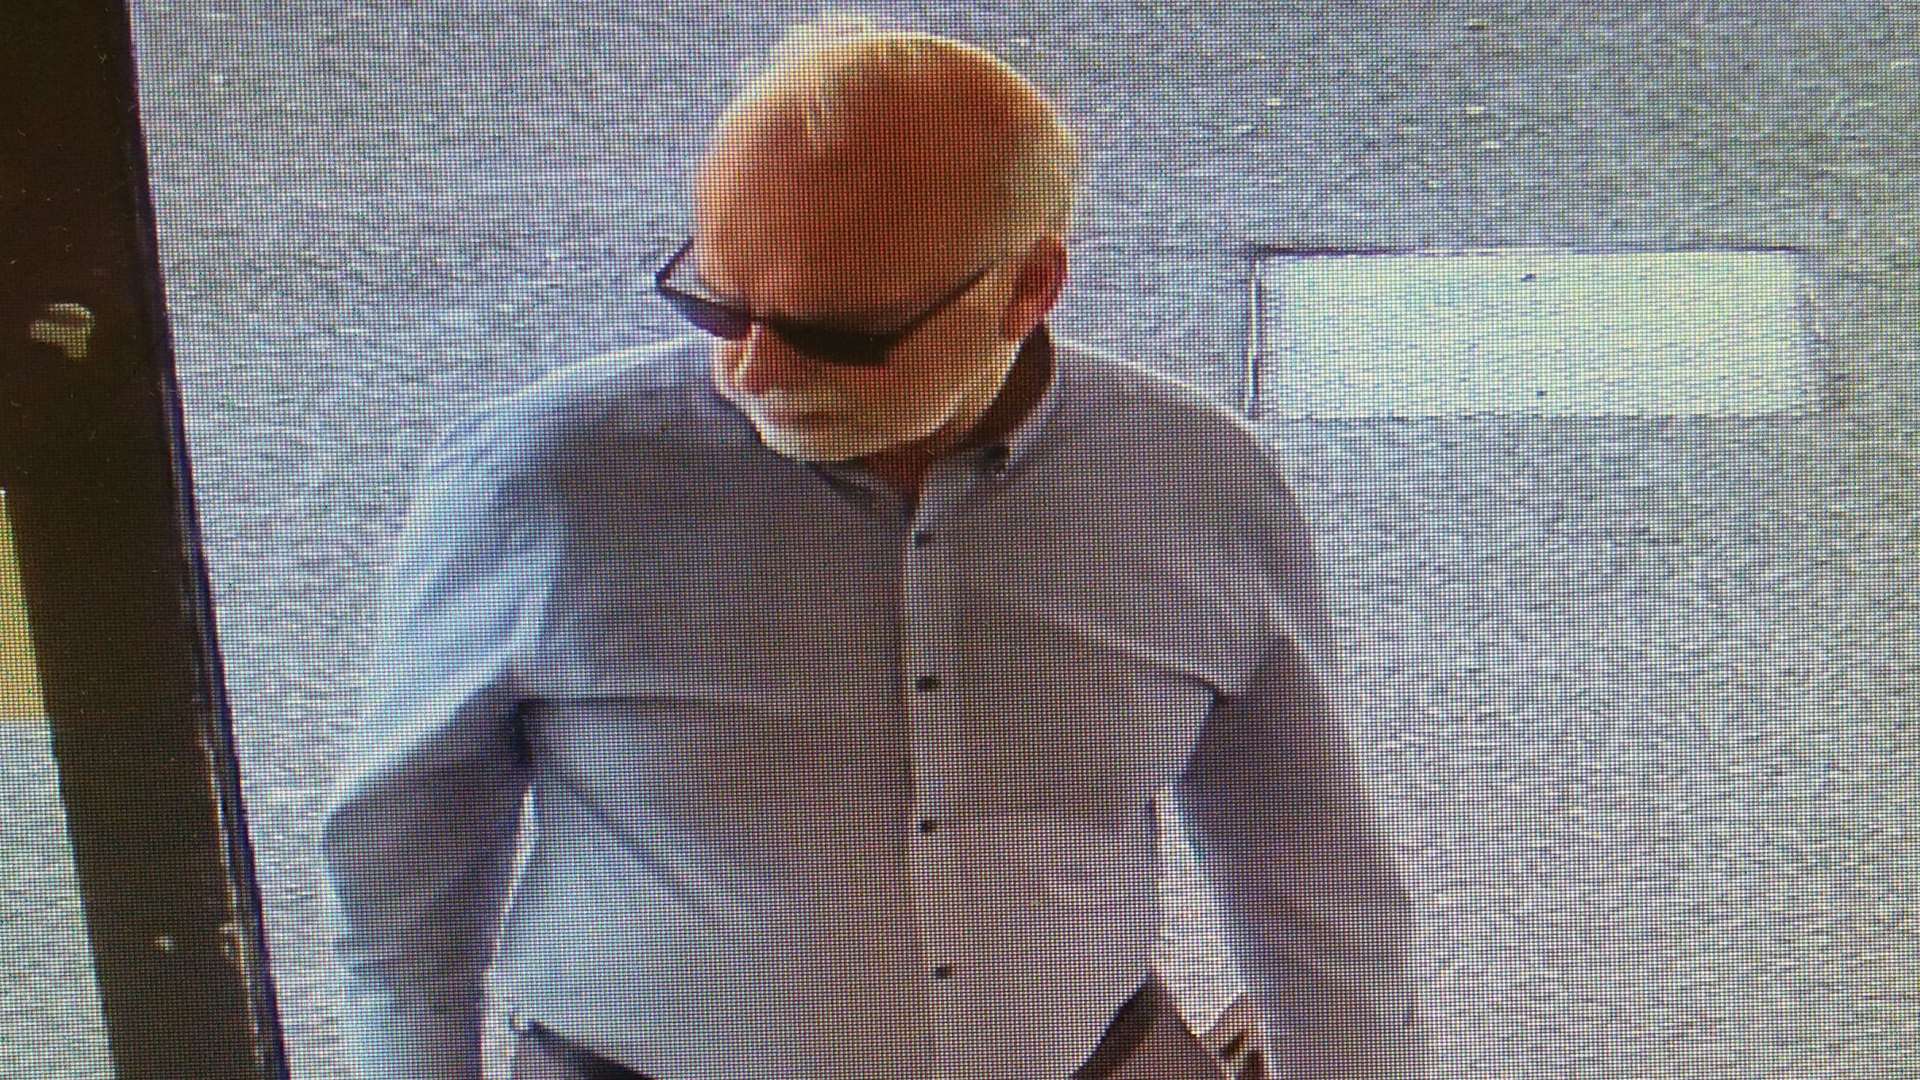 Ken Henson was seen on CCTV in the Shell petrol station on Tubbs Hill, Sevenoaks, on Friday, May 25